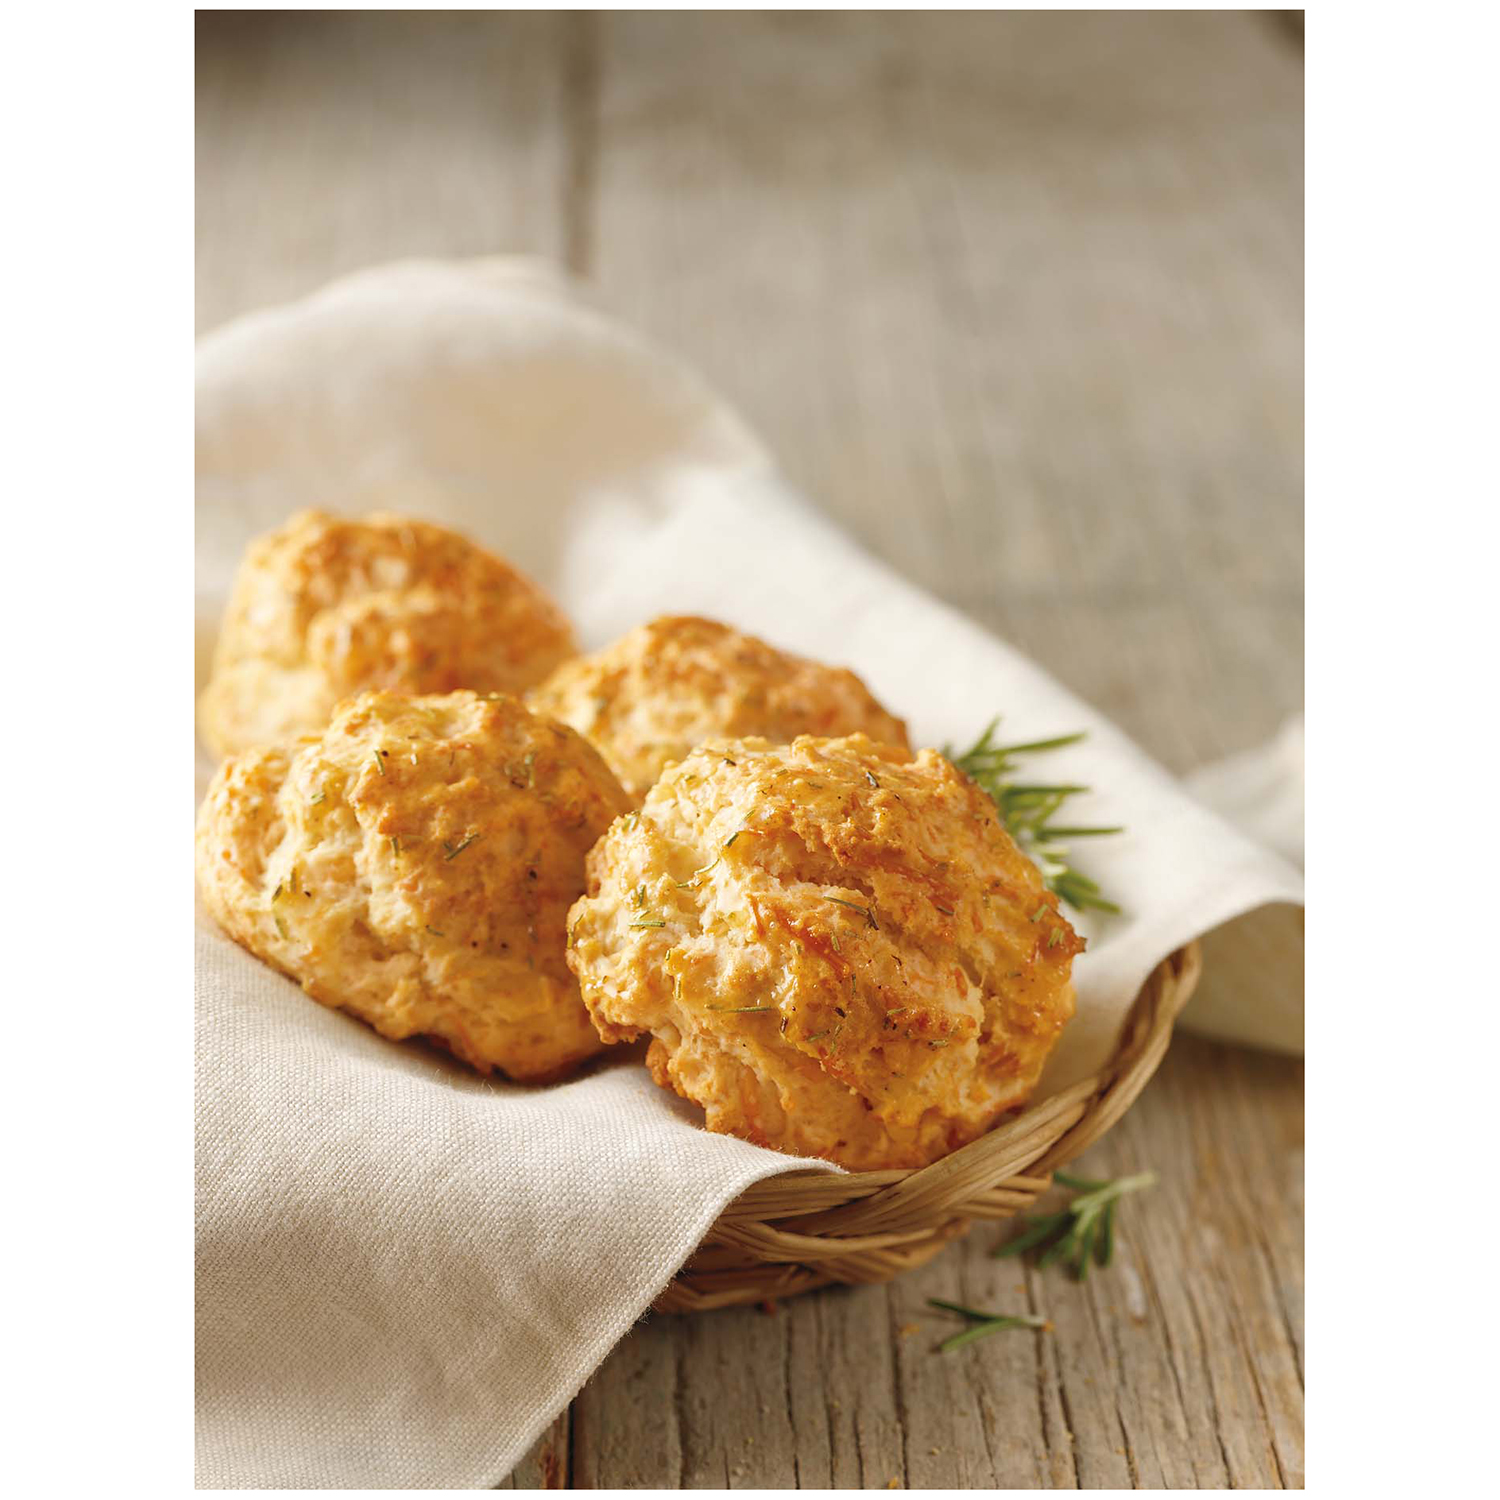 Red Lobster Cheddar Bay Biscuit Mix, Gluten-Free, 11.36 oz Box - image 3 of 7